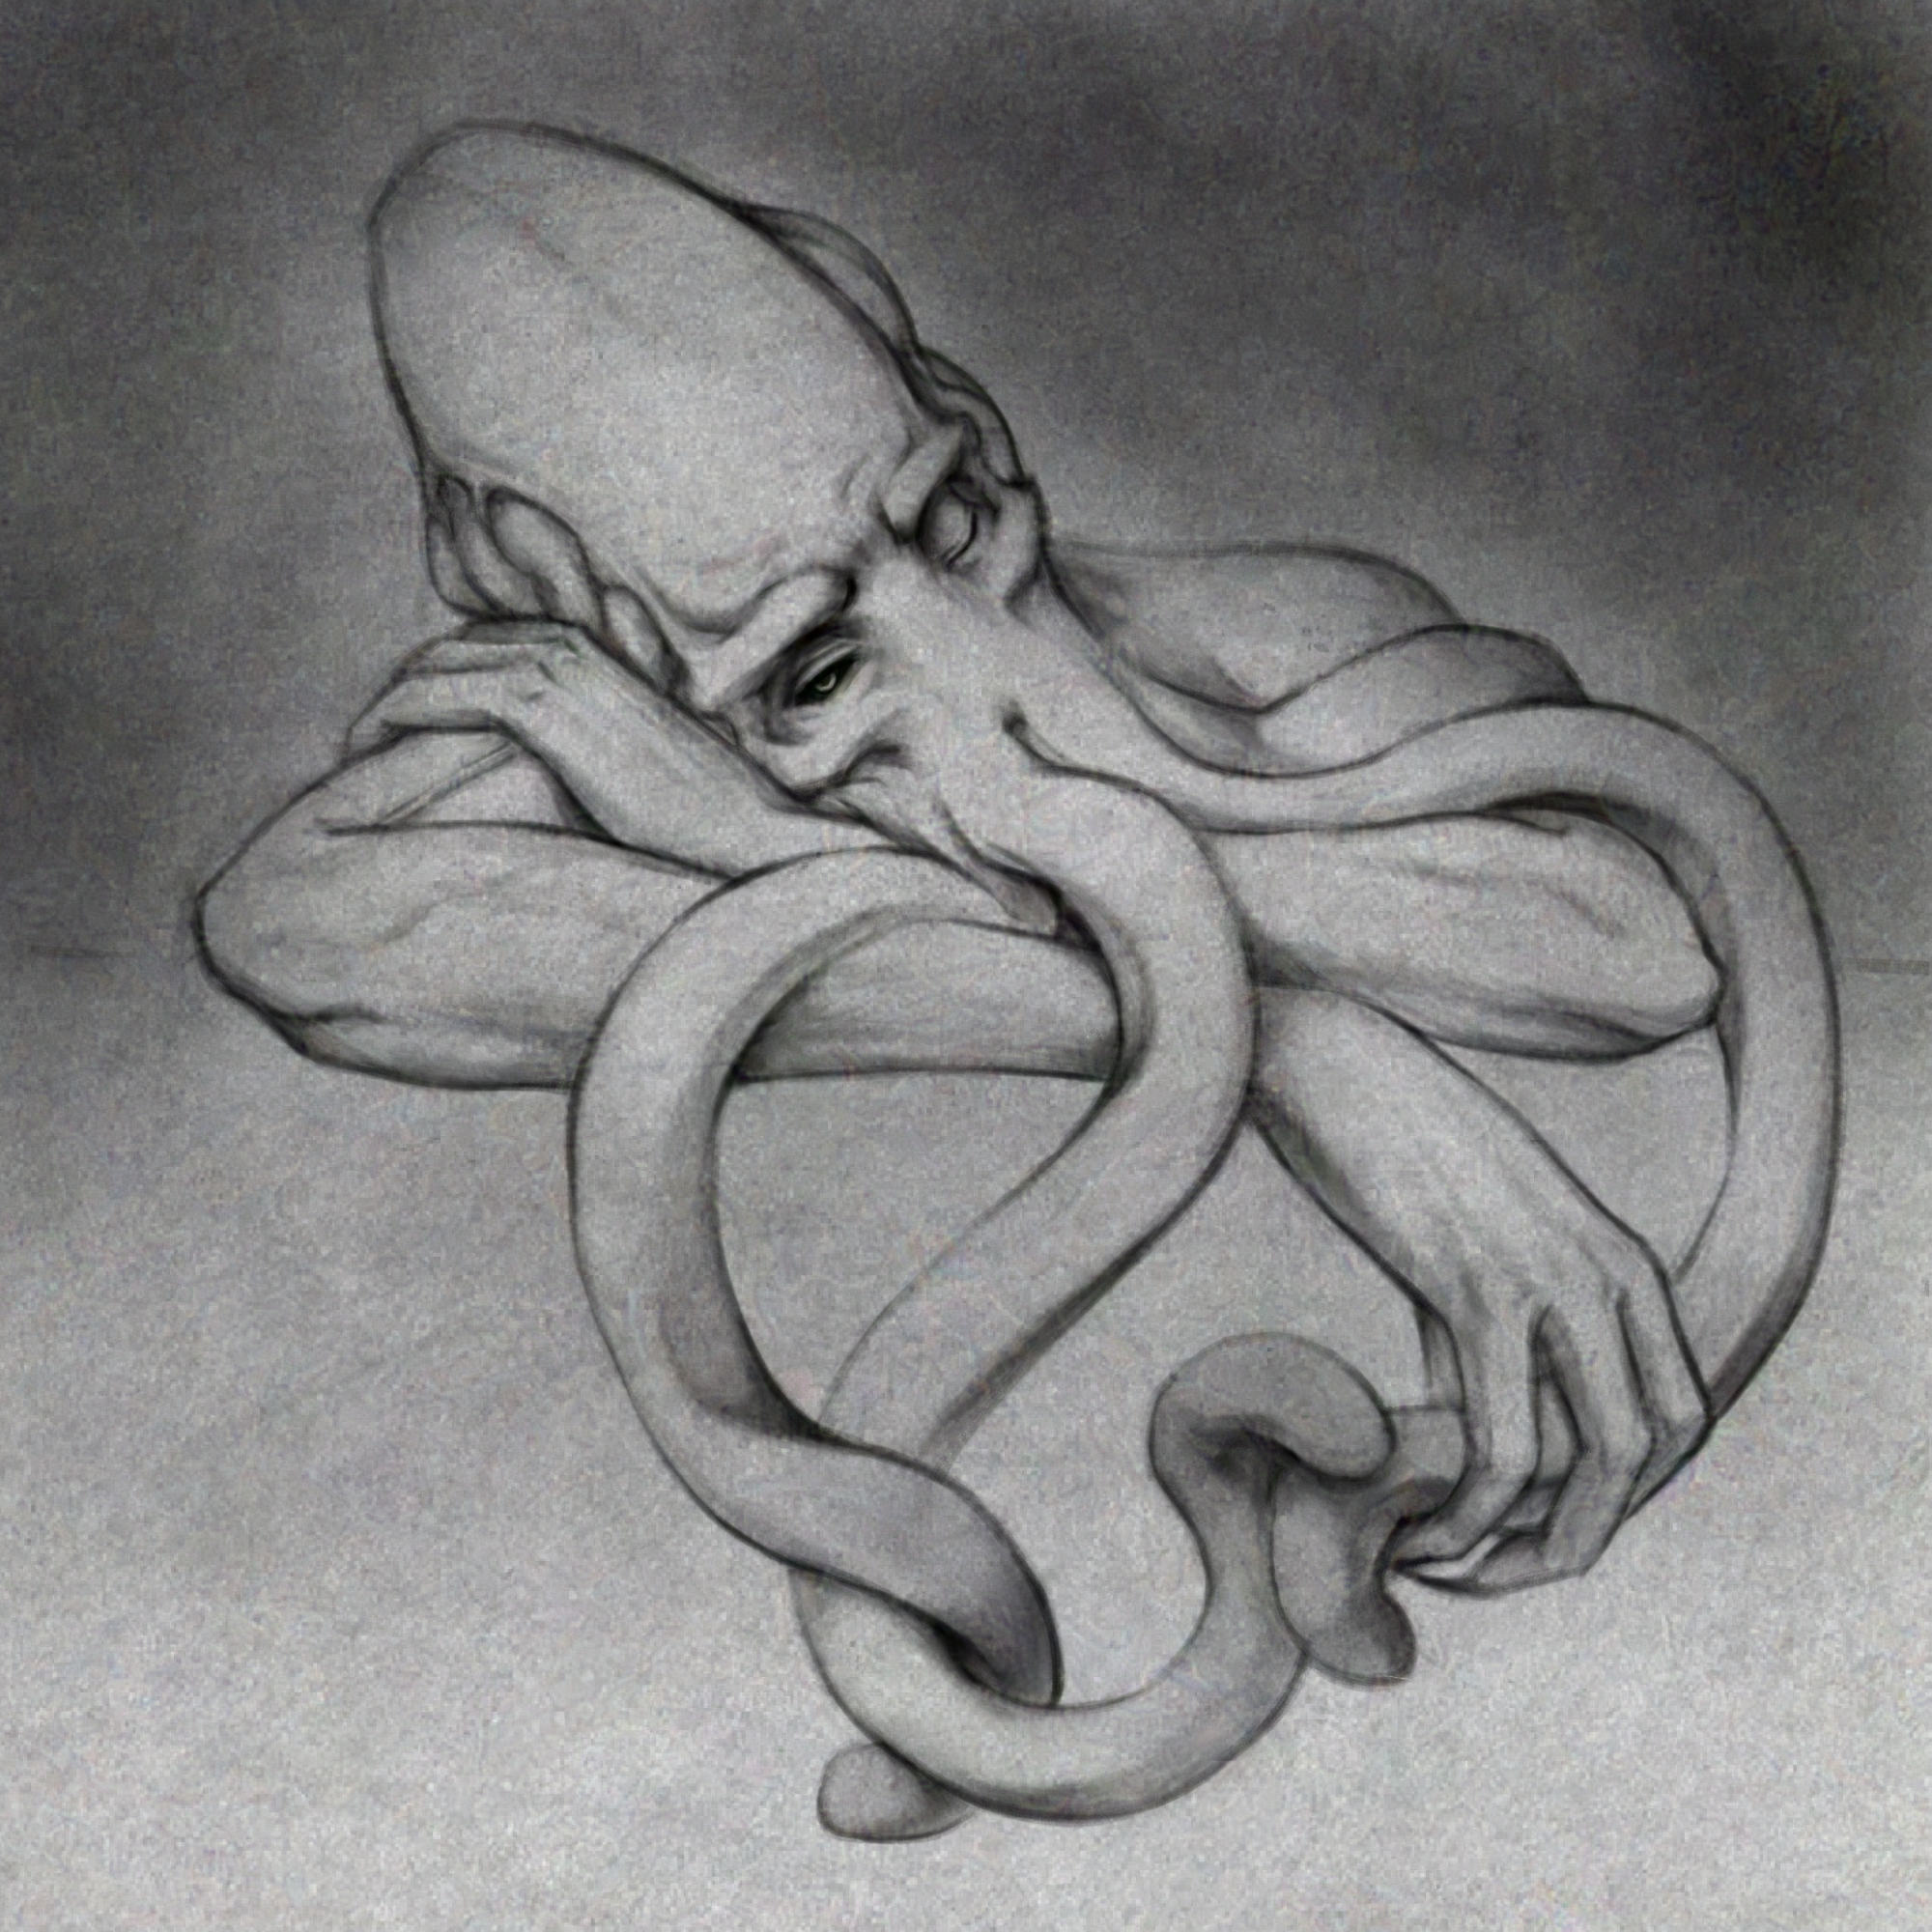 The Emperor (an illithid) is lounging on a flat surface, with their head, shoulders and arms only visible. They're resting their head to the left side on their arm, with one eye open looking at the viewer and the other eye closed. Their hand is holding one of their tentacles.